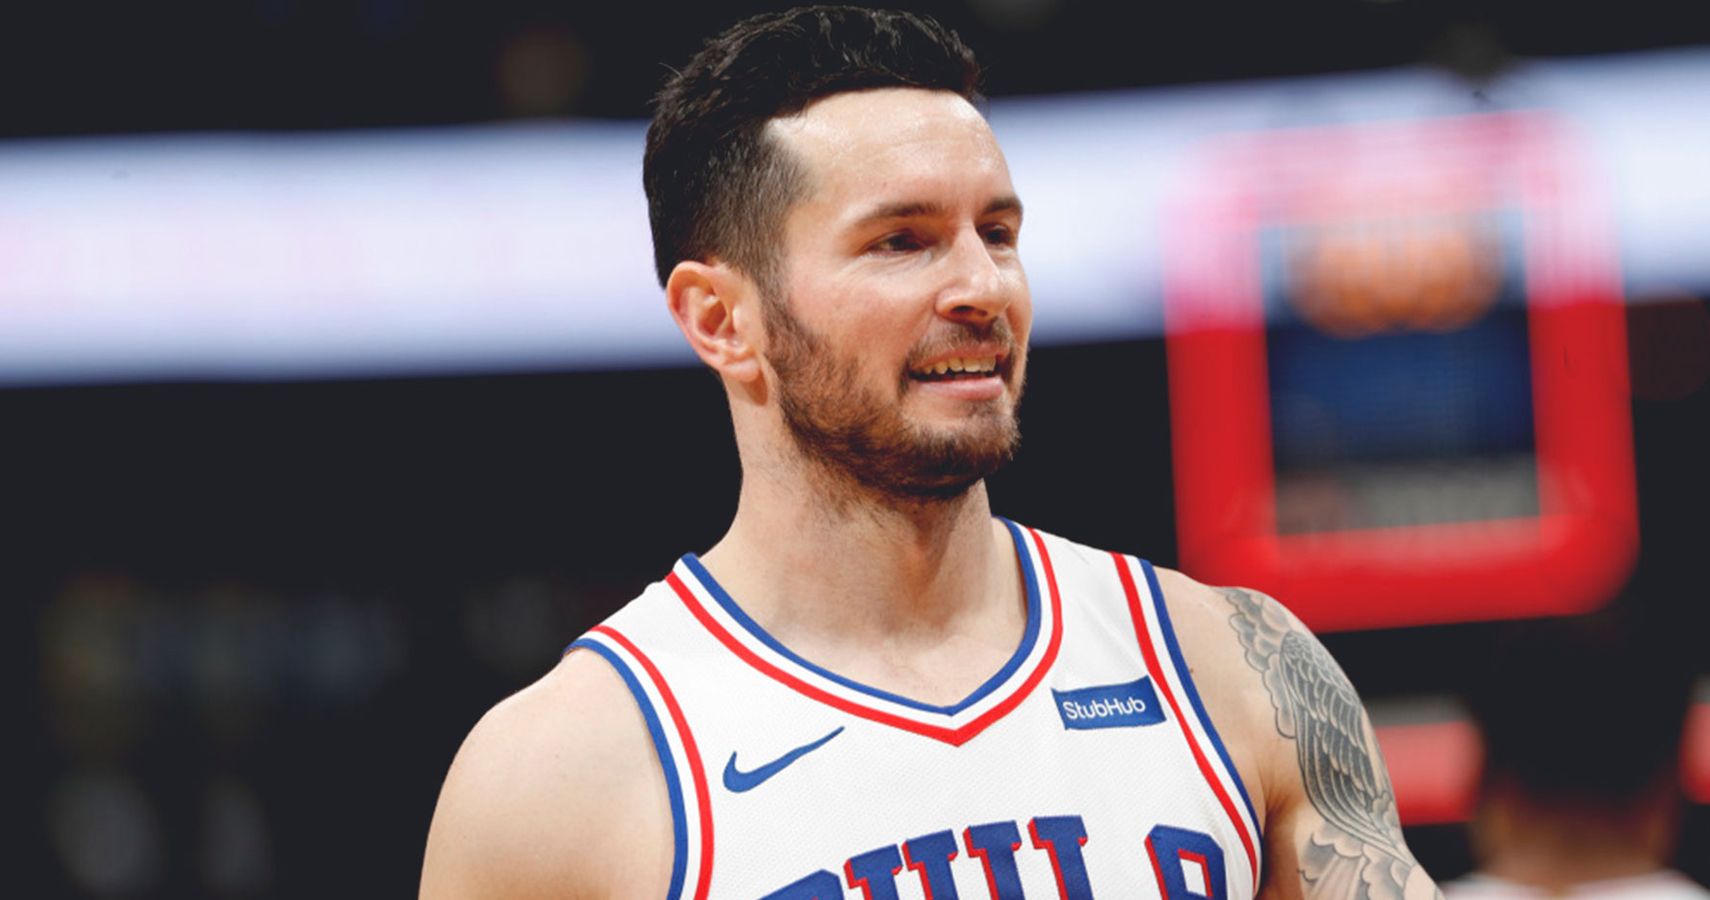 SIXERS SHARPSHOOTER JJ REDICK ALMOST SIGNED WITH INDY!